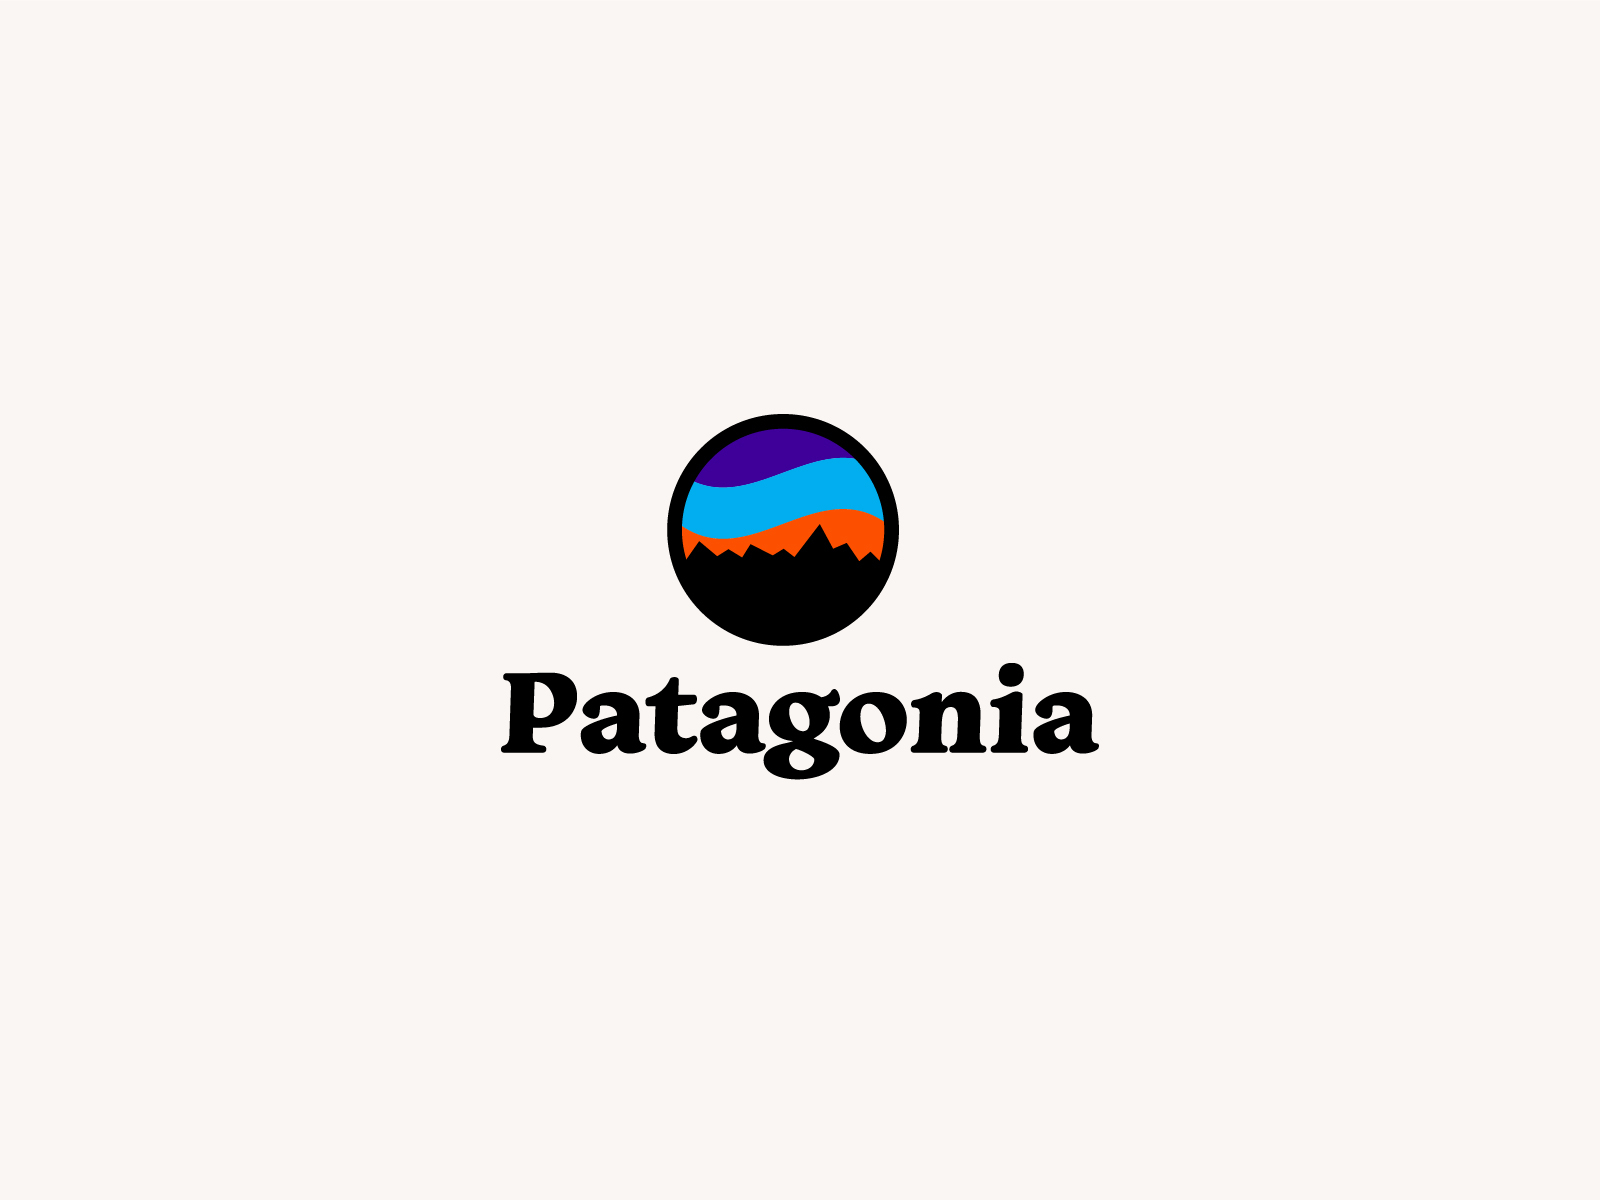 Patagonia 2.0 by Sune Reinert on Dribbble